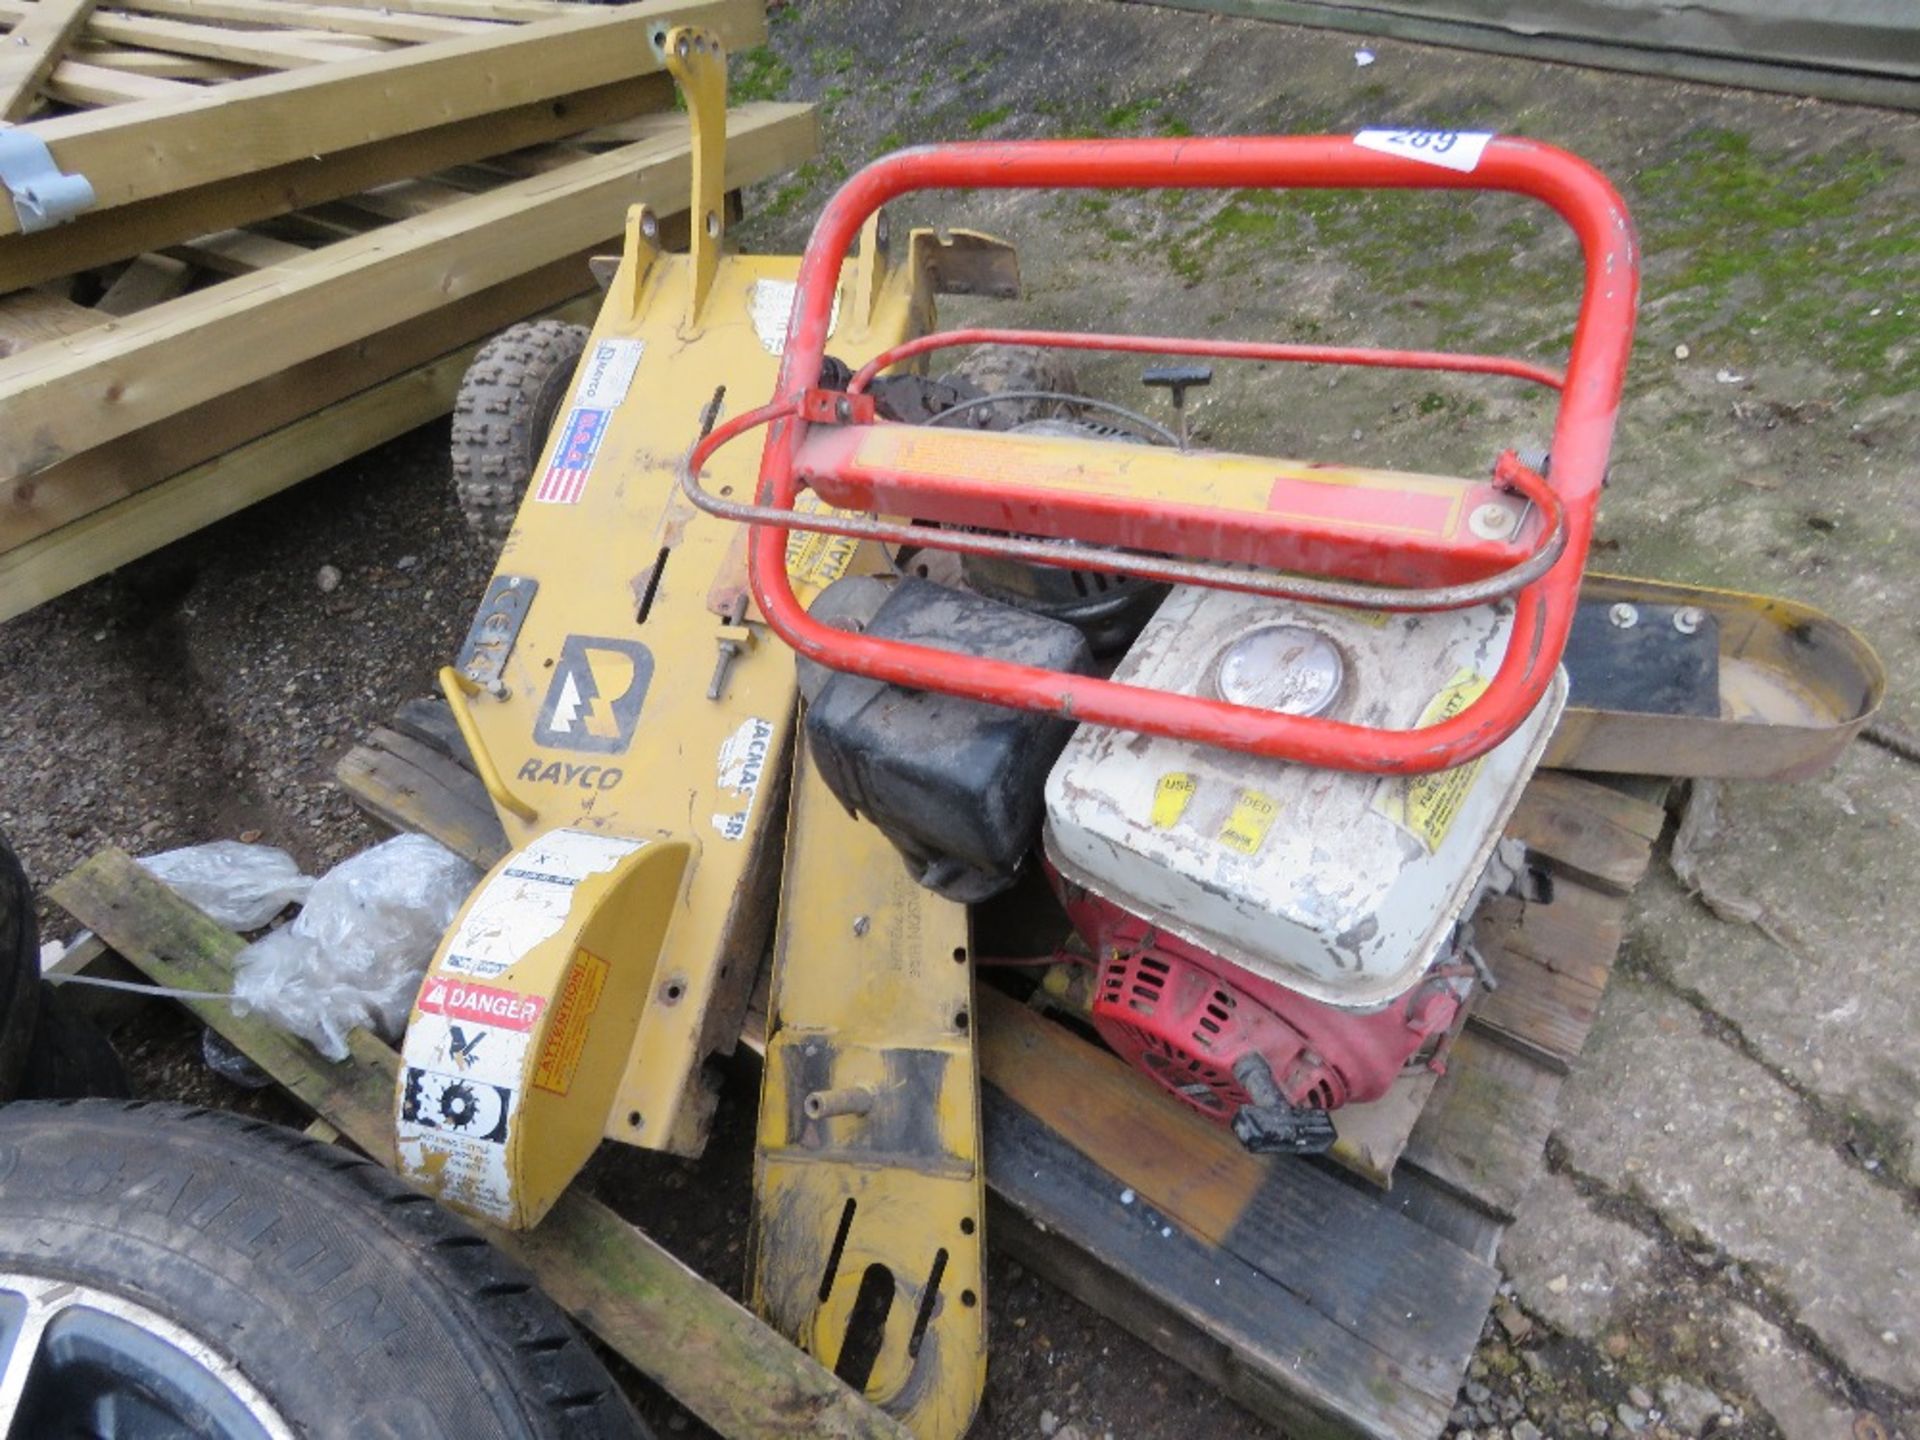 RAYCO HEAVY DUTY STUMP GRINDER PARTS. SOURCED FROM LOCAL DEPOT CLOSURE.